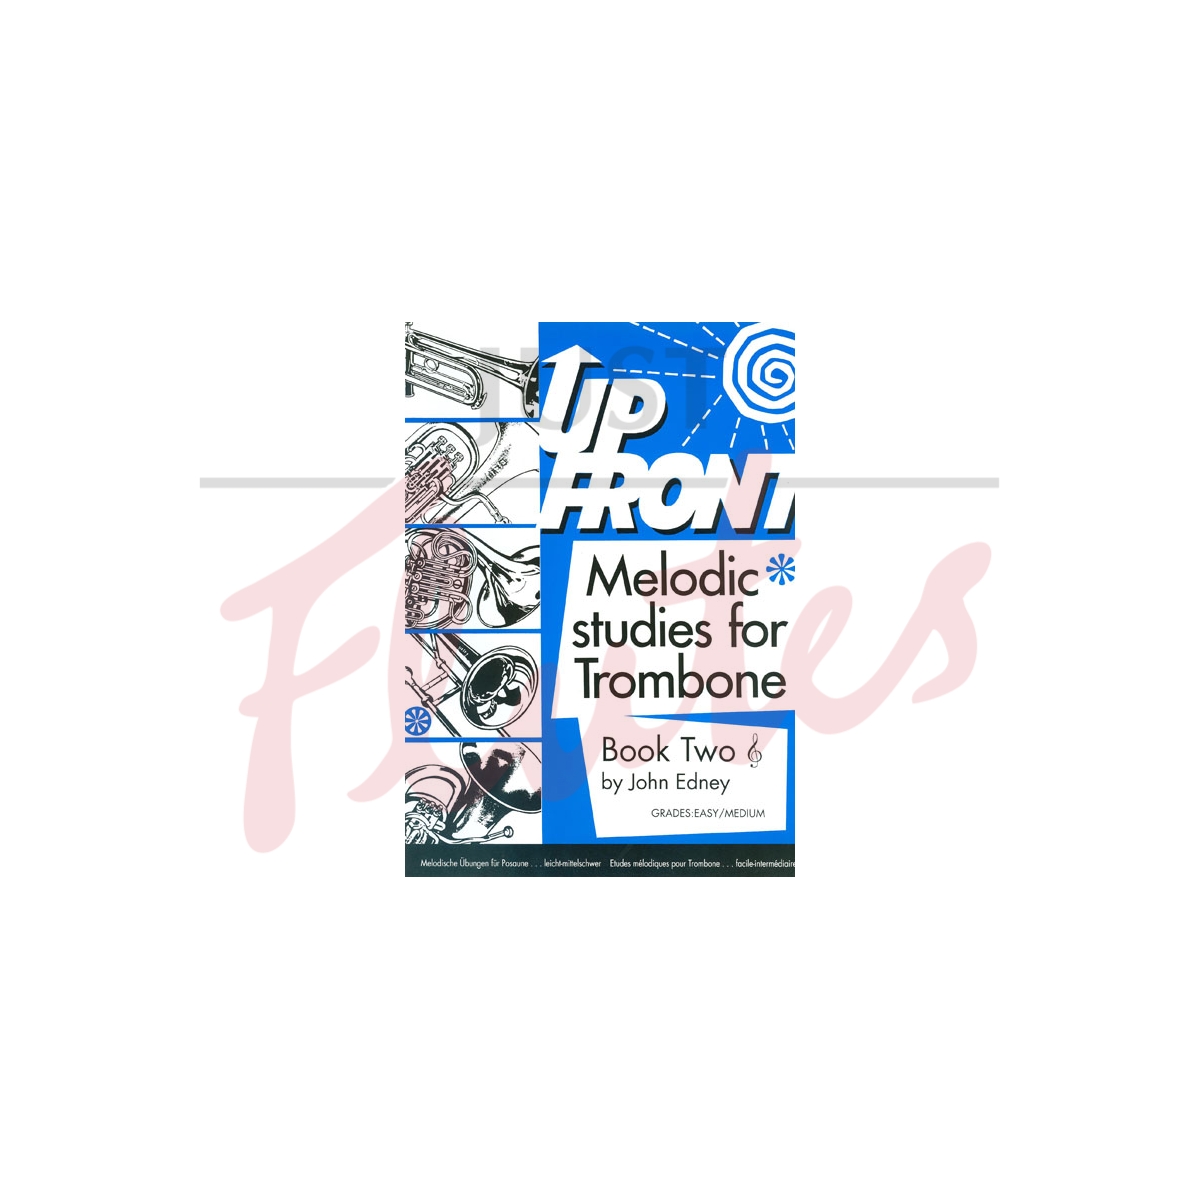 Up Front Melodic Studies for Trombone [Treble Clef] Book 2